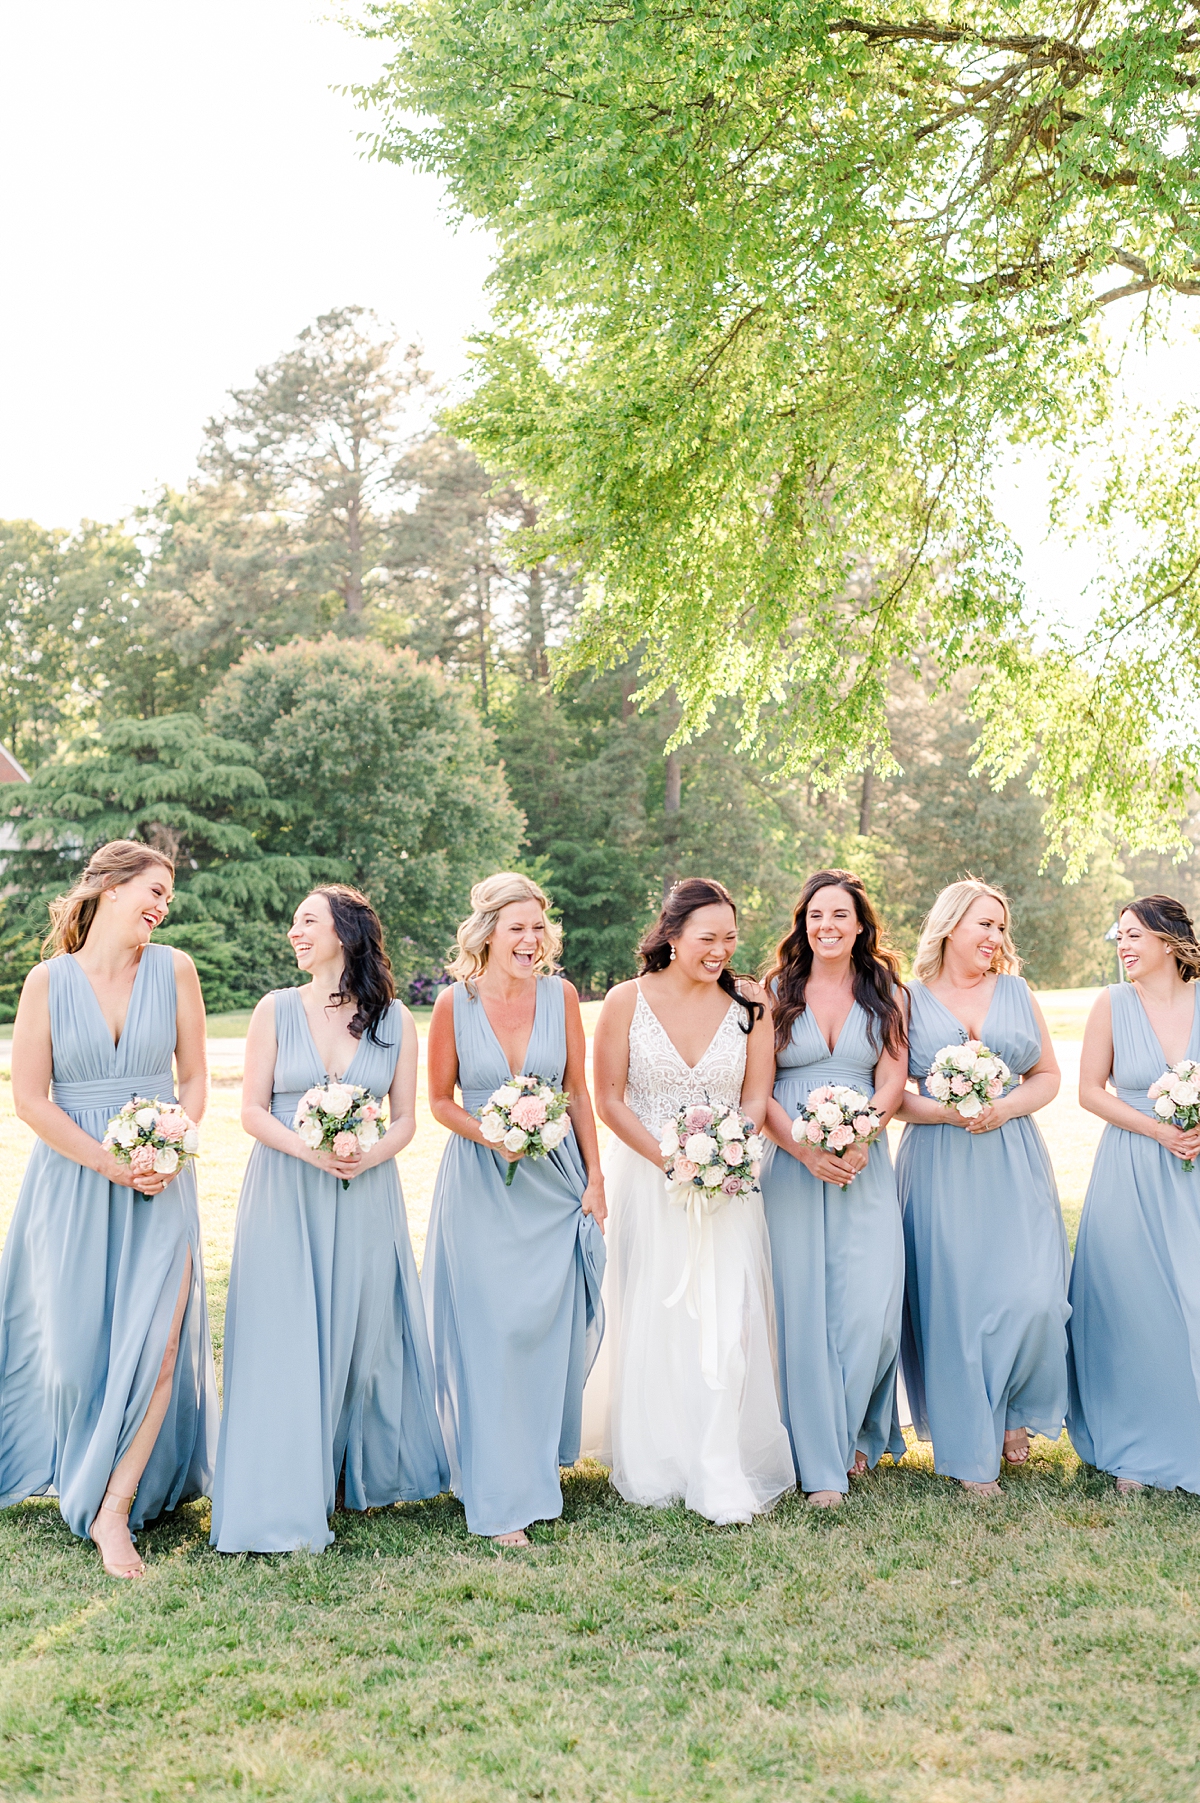 Bride and Bridesmaid Bouquets with Sola Wood Flowers at Spring Hanover wedding. Hanover Wedding Photographer Kailey Brianne Photography. 